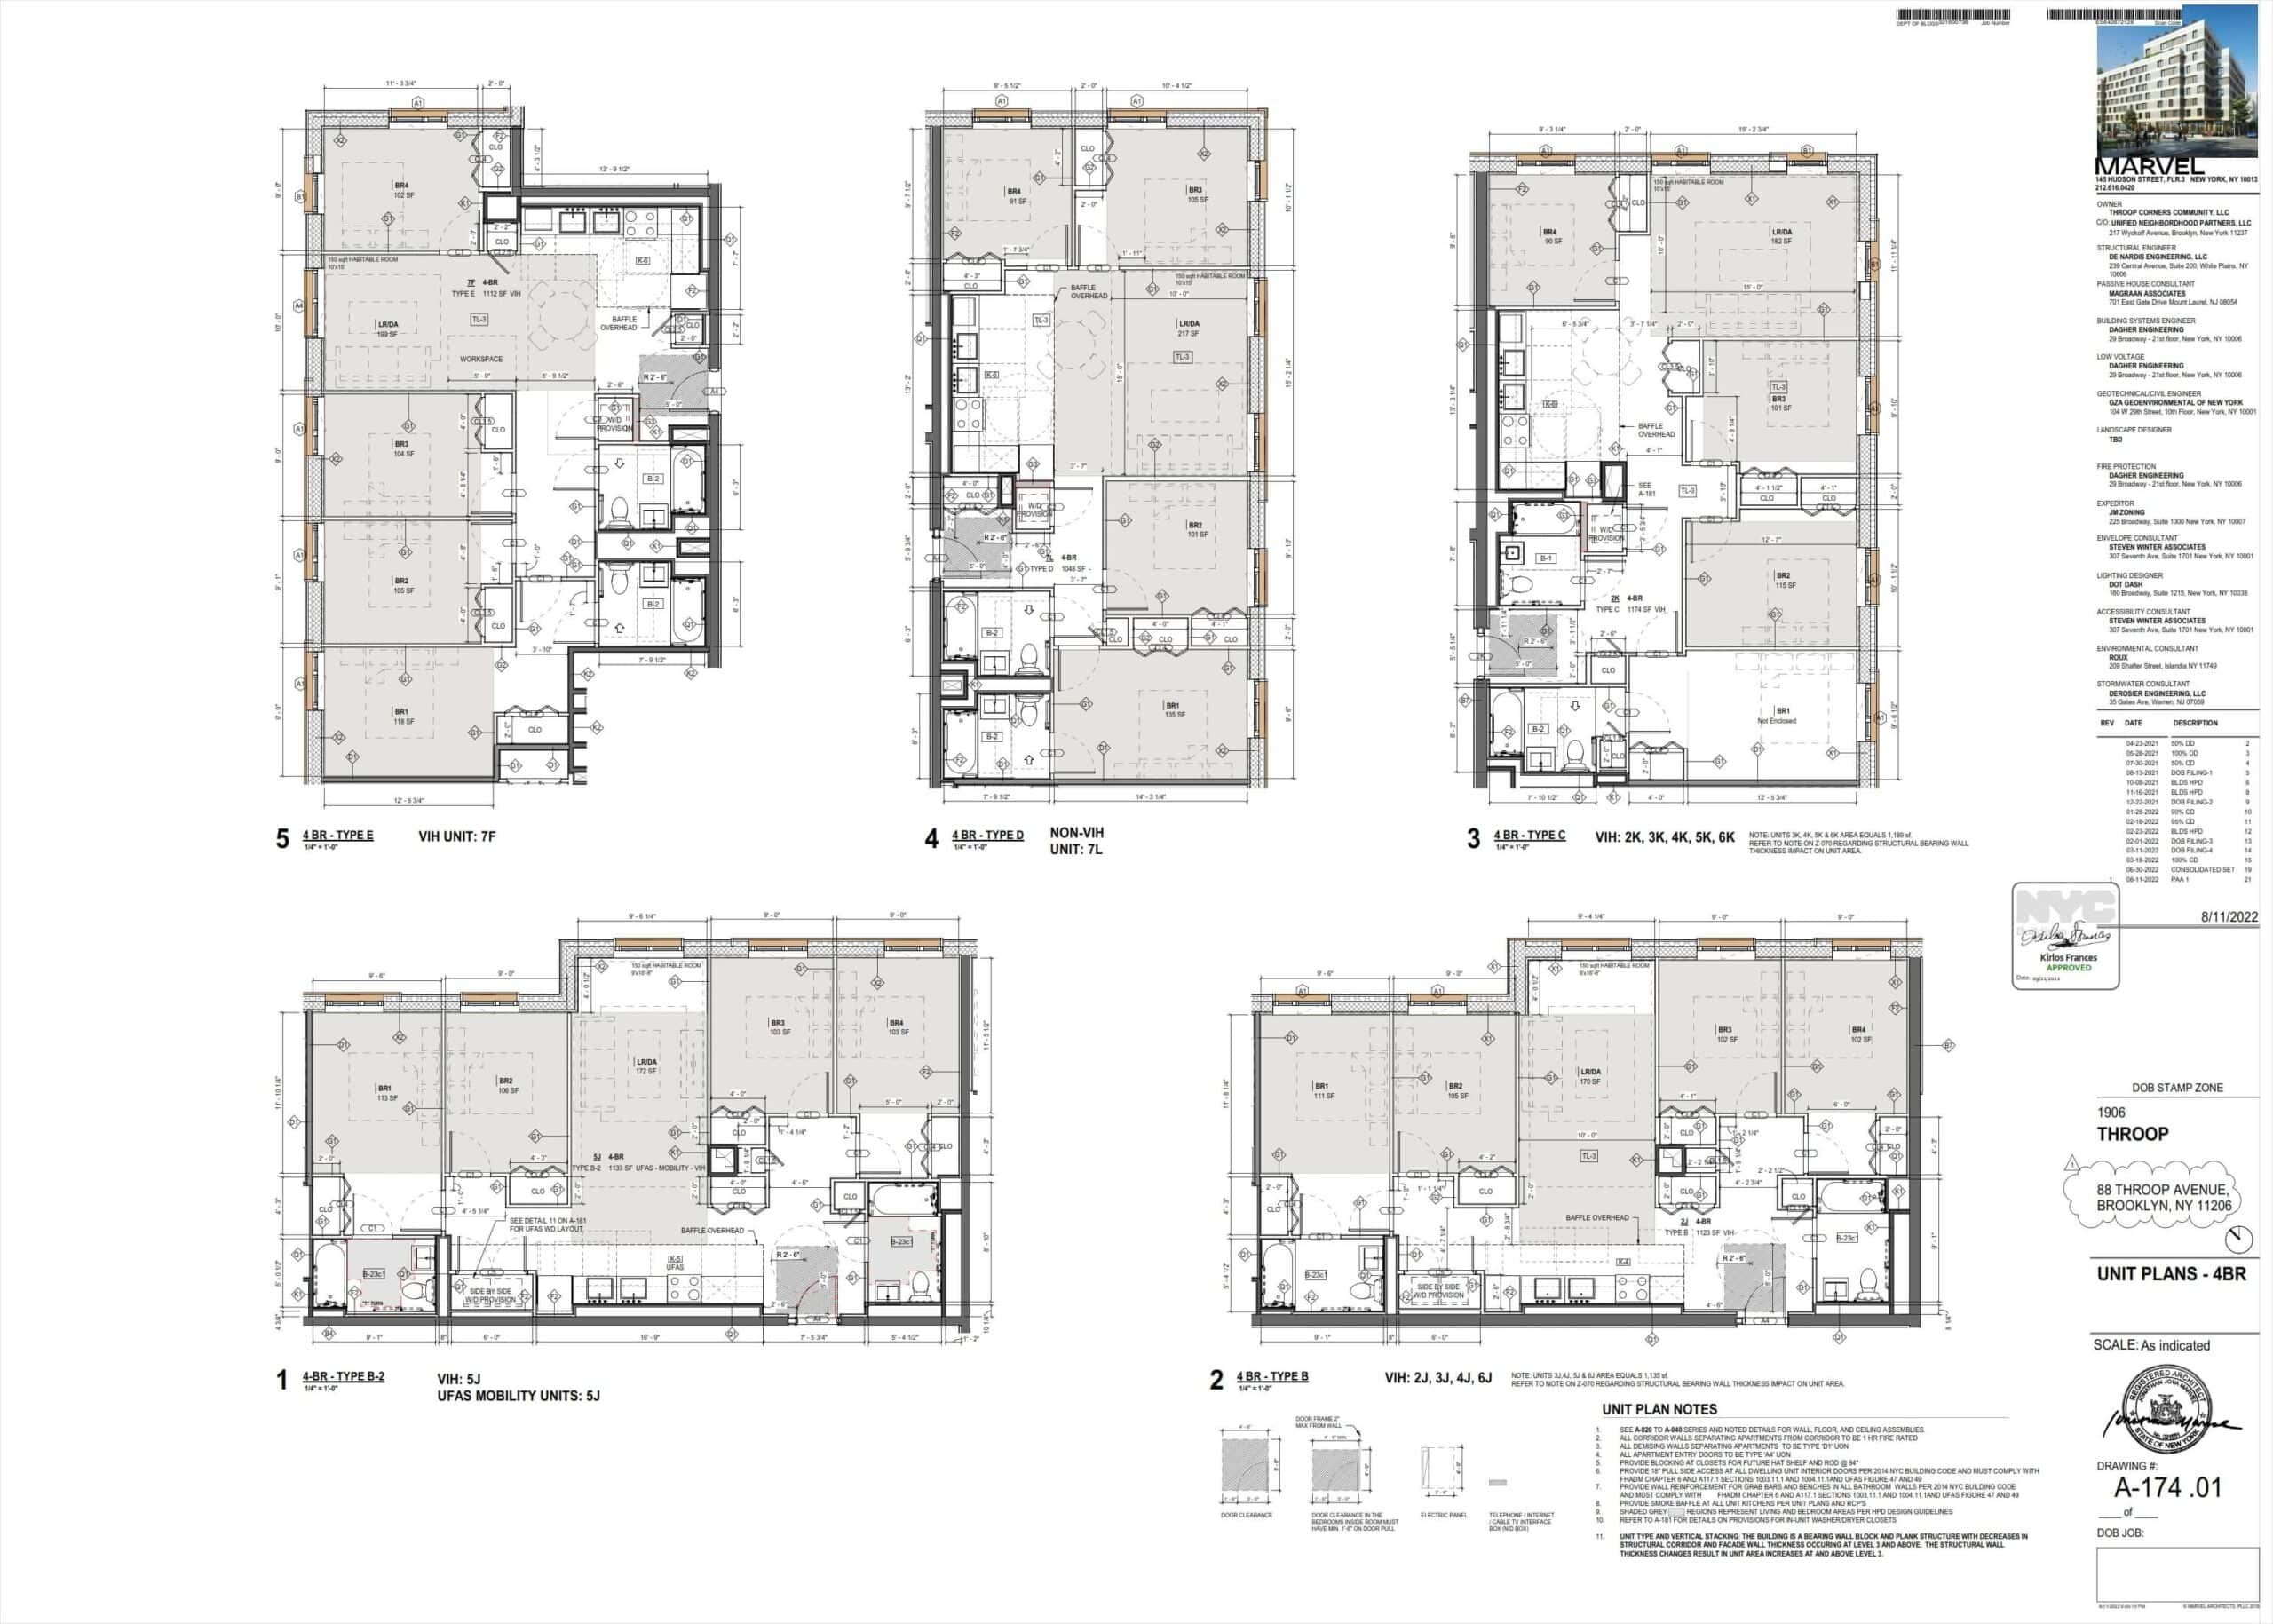 floor plans showing units with multiple bedrooms